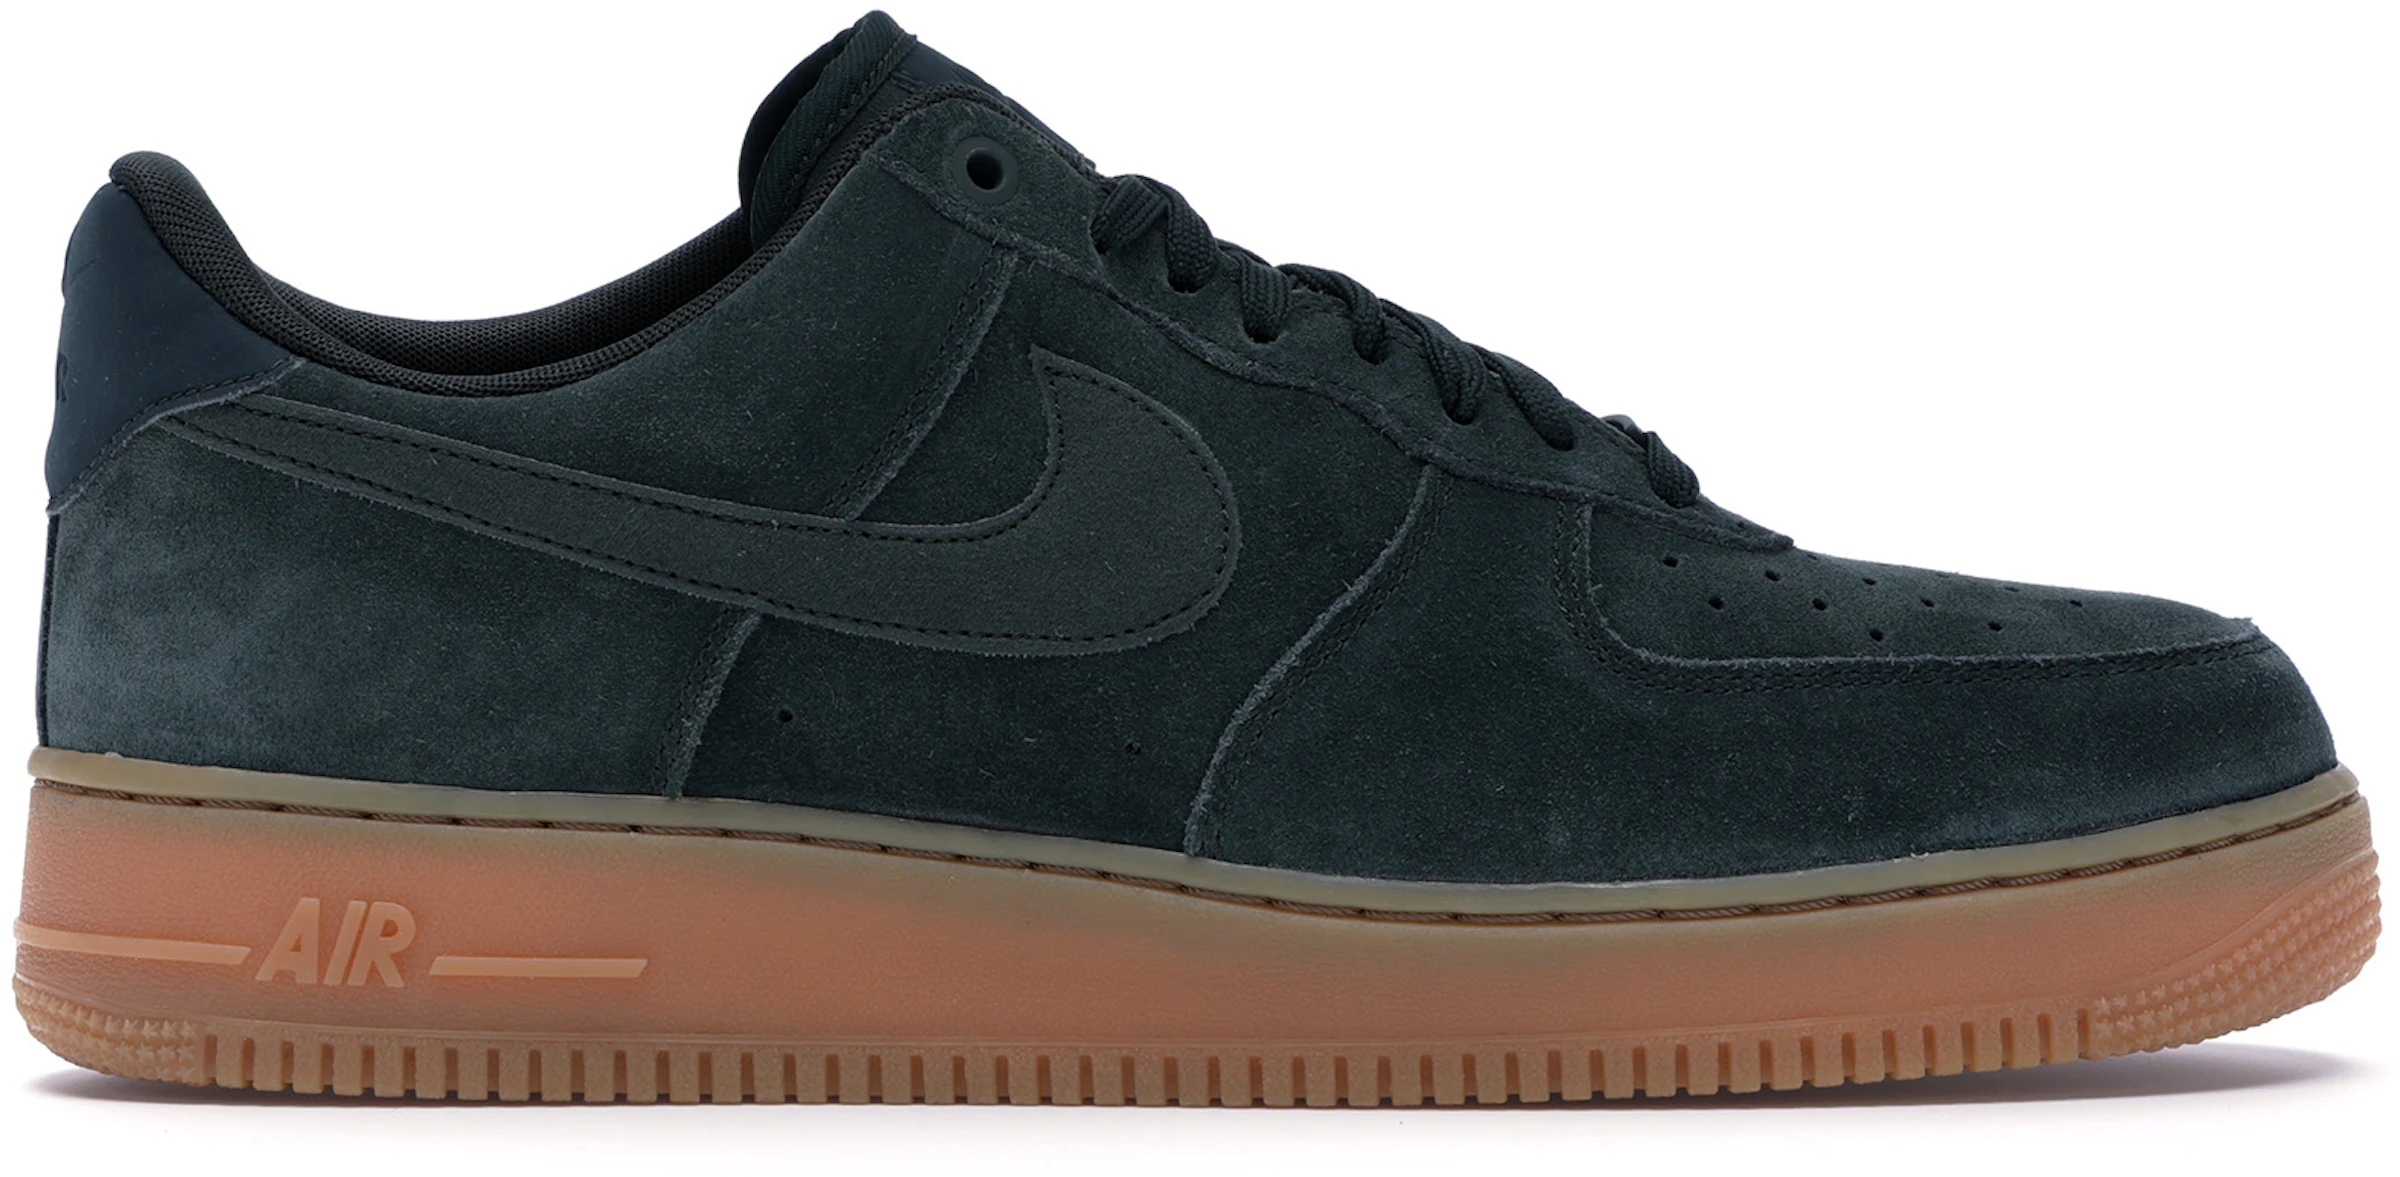 Air Force 1 Low '07 LV8 Suede Outdoor Green - AA1117-300 - ES